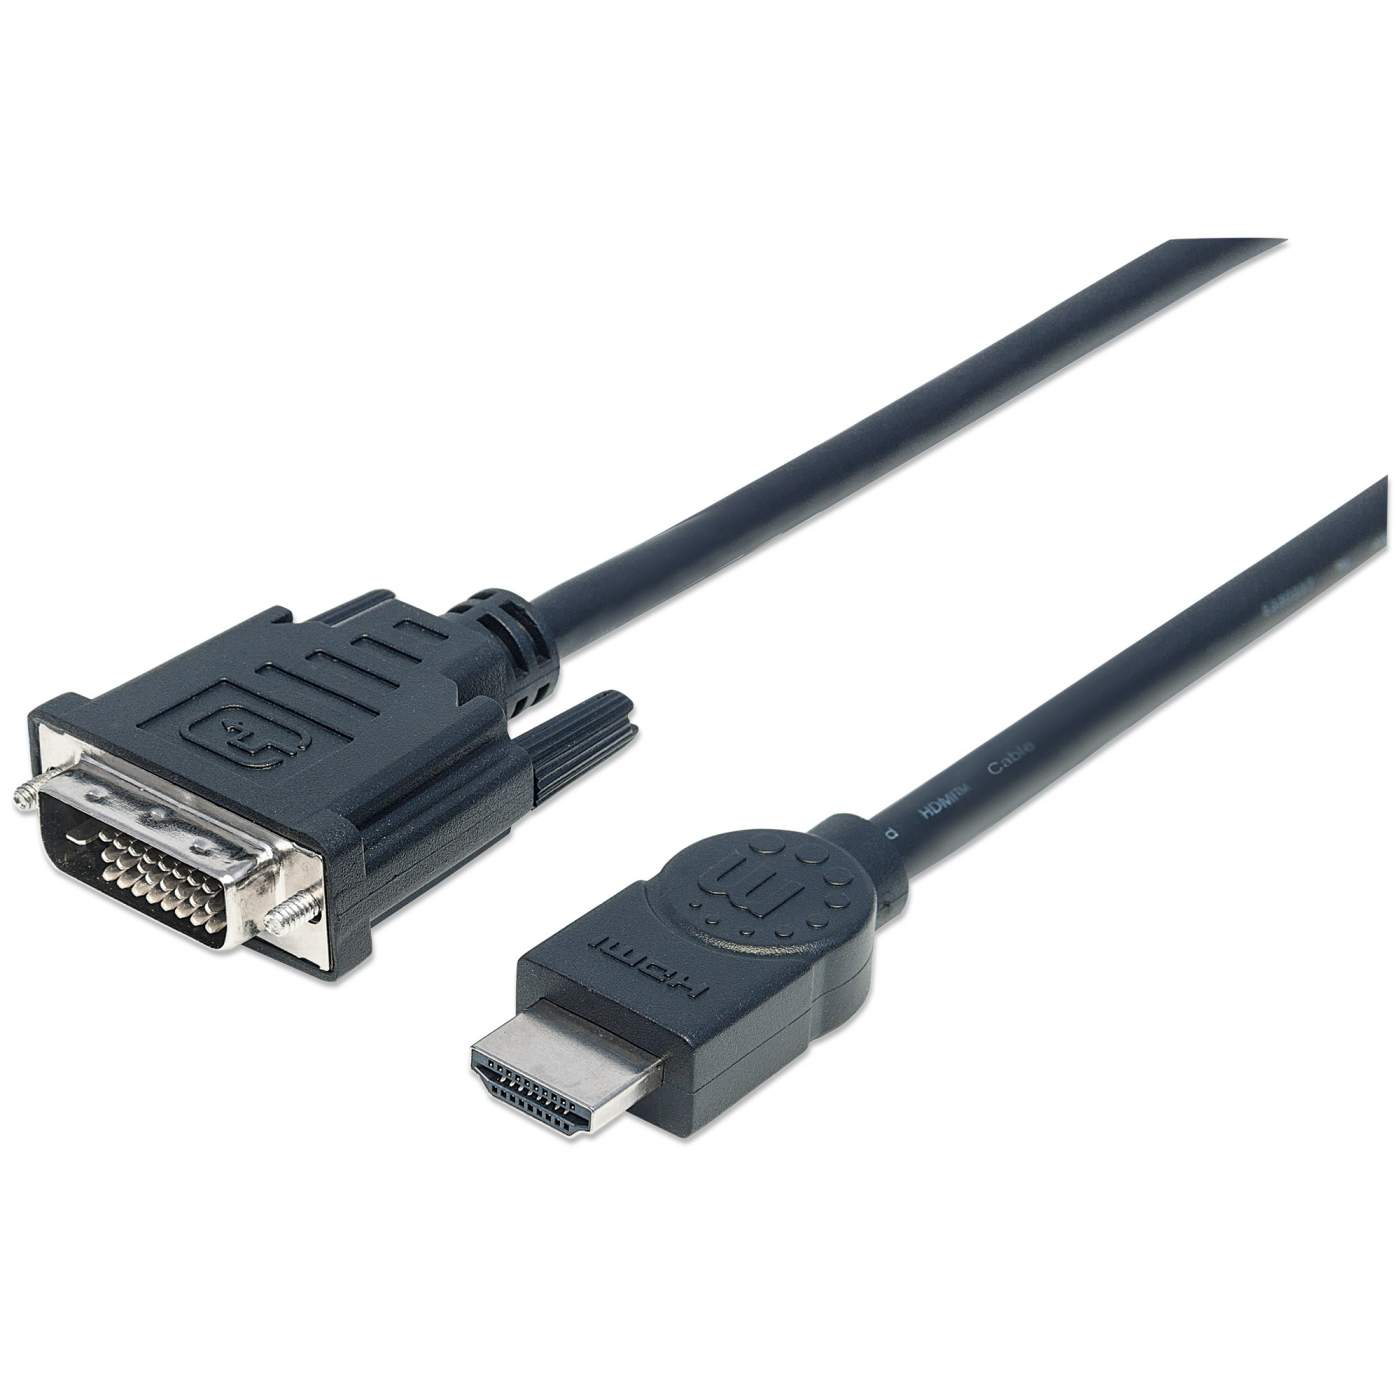 https://cdn.shopify.com/s/files/1/0414/6112/1174/products/hdmi-to-dvi-d-cable-372510-1.jpg?v=1678689000&width=1400